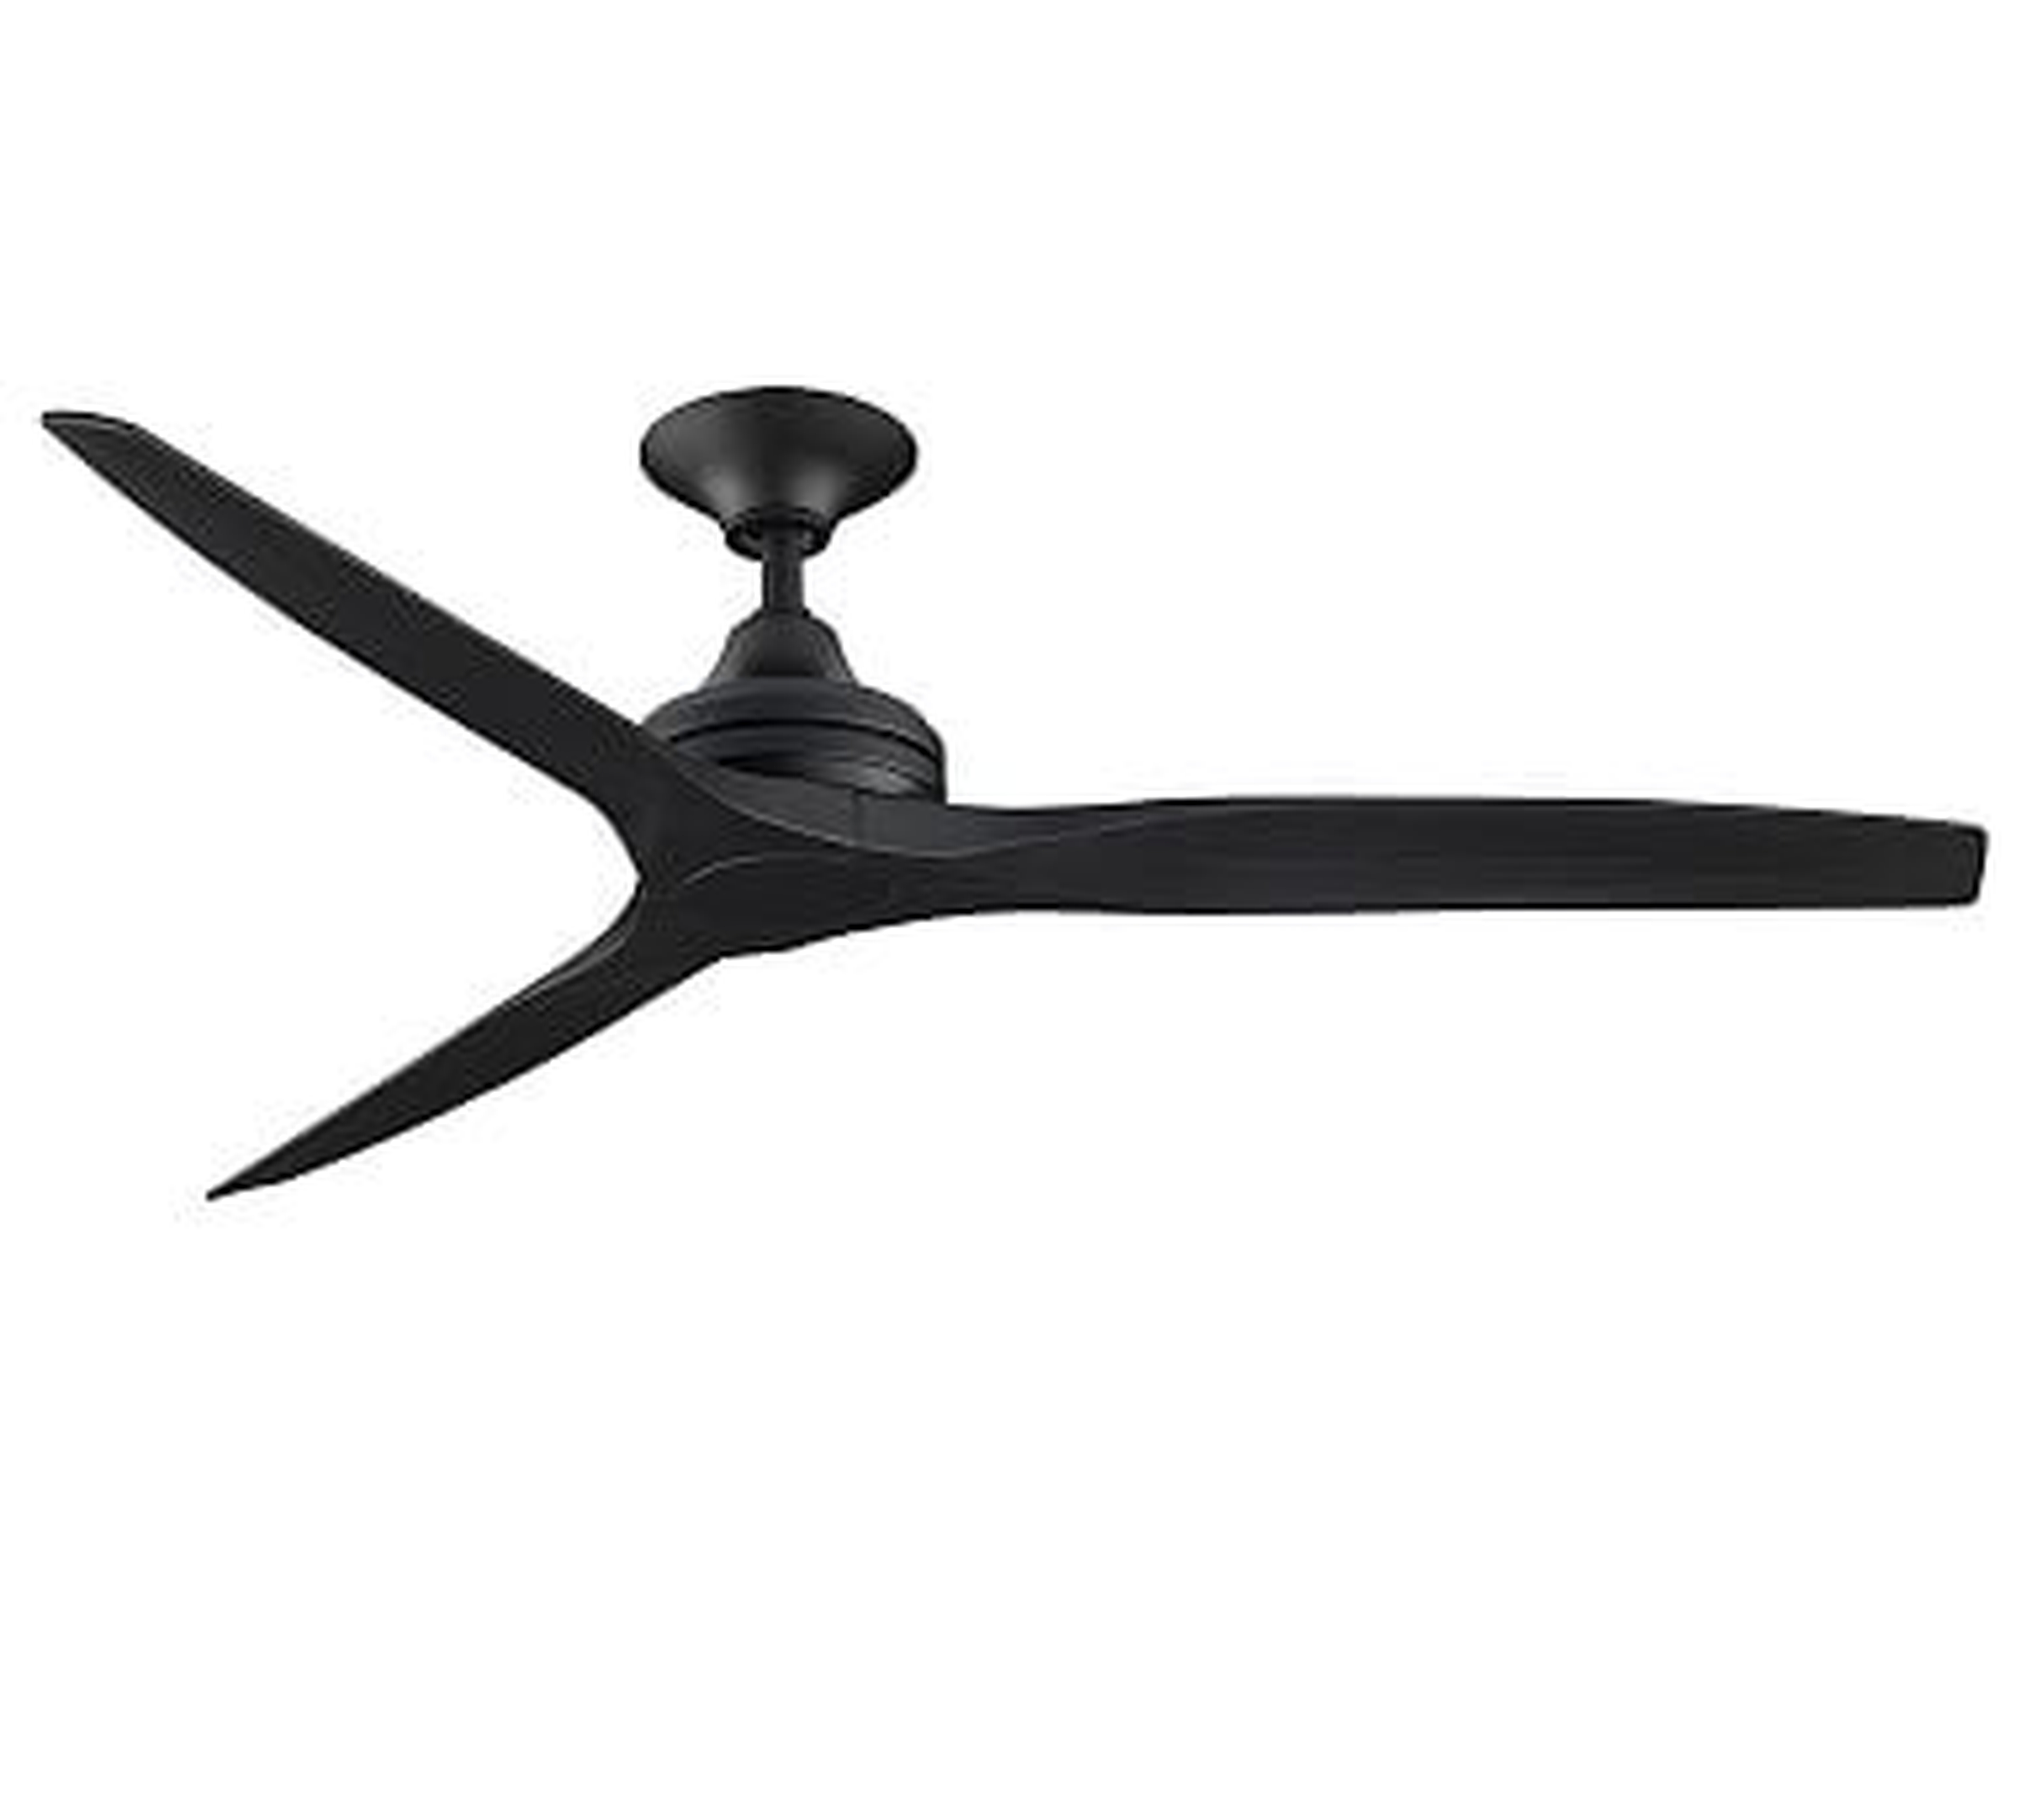 60" Spitfire Indoor/Outdoor Ceiling Fan, Black Motor with Black Blades - Pottery Barn